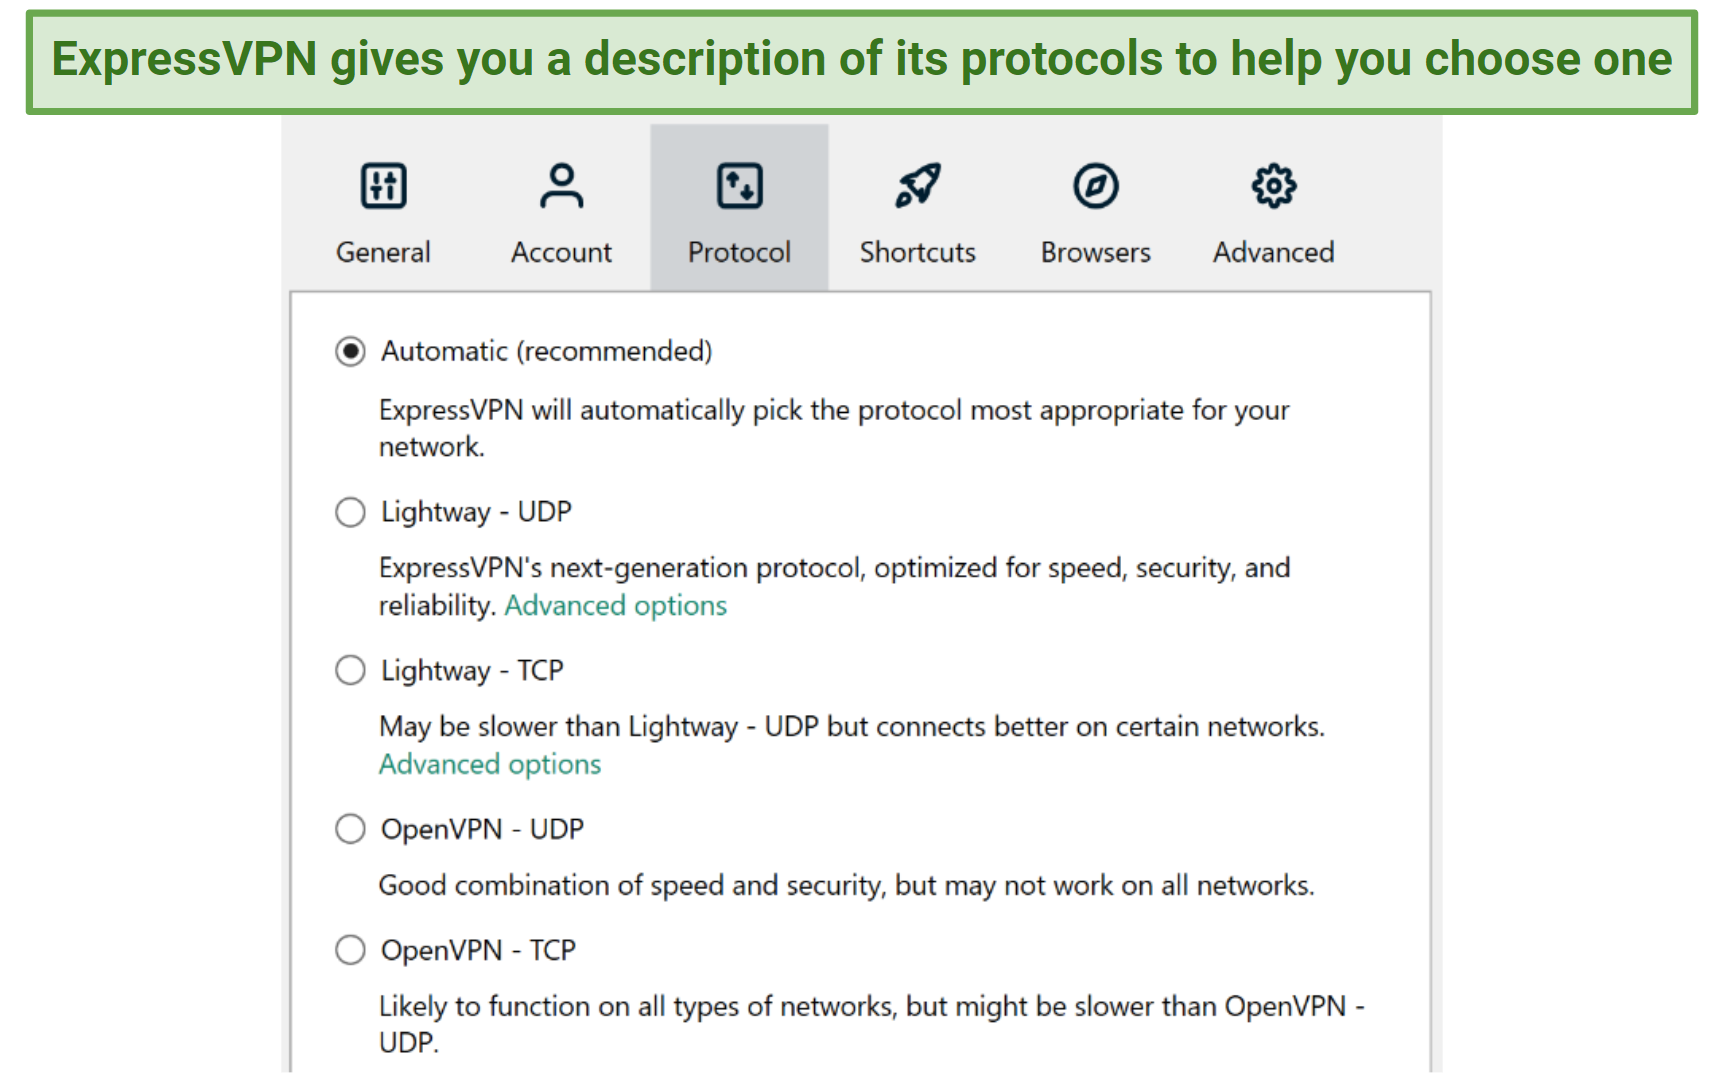 Screenshot of ExpressVPN list of protocols with descriptions in the Windows app